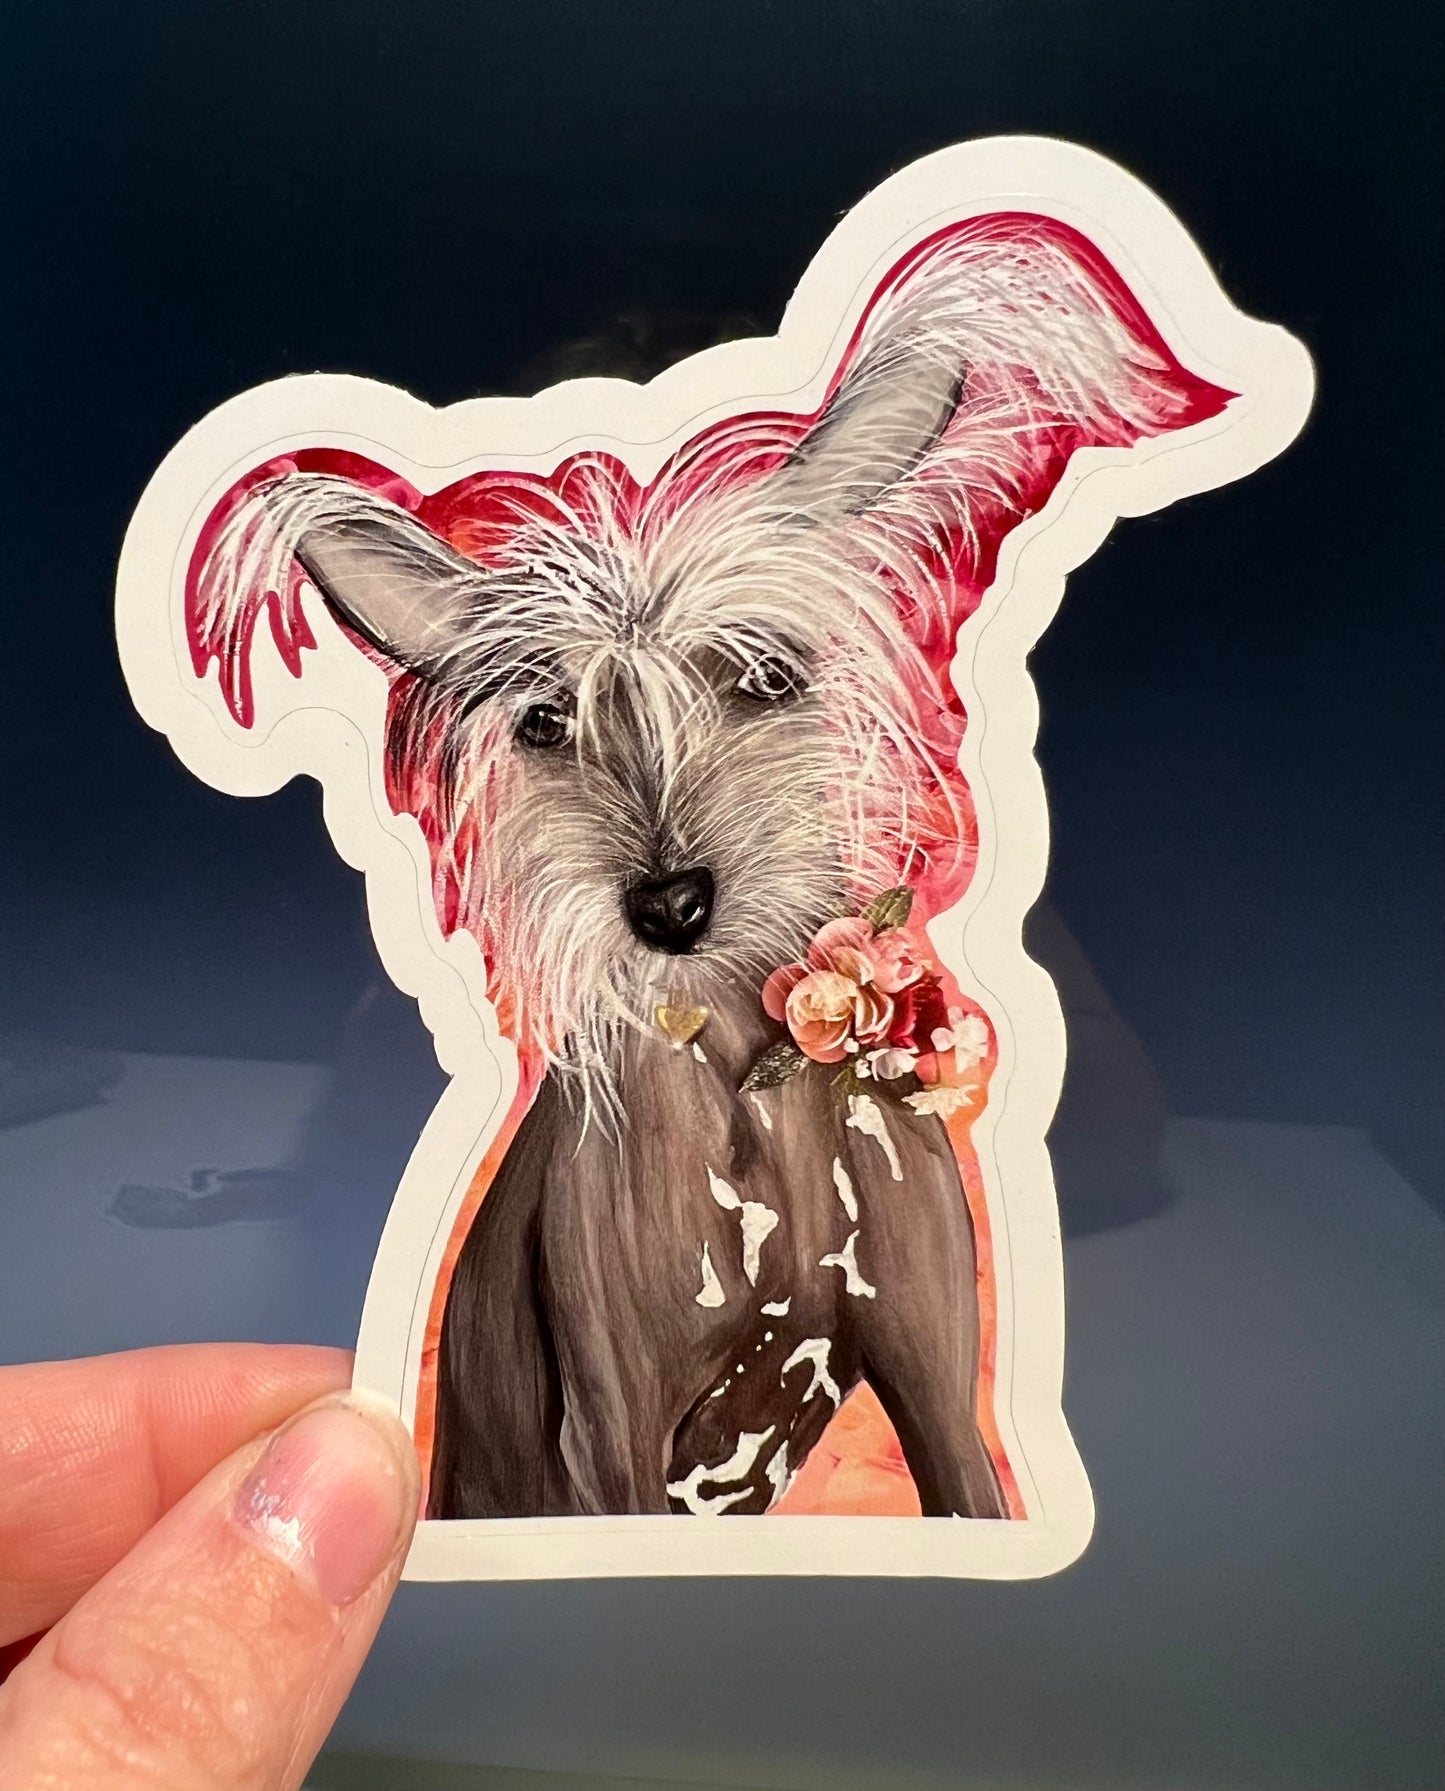 Chinese Crested Sticker